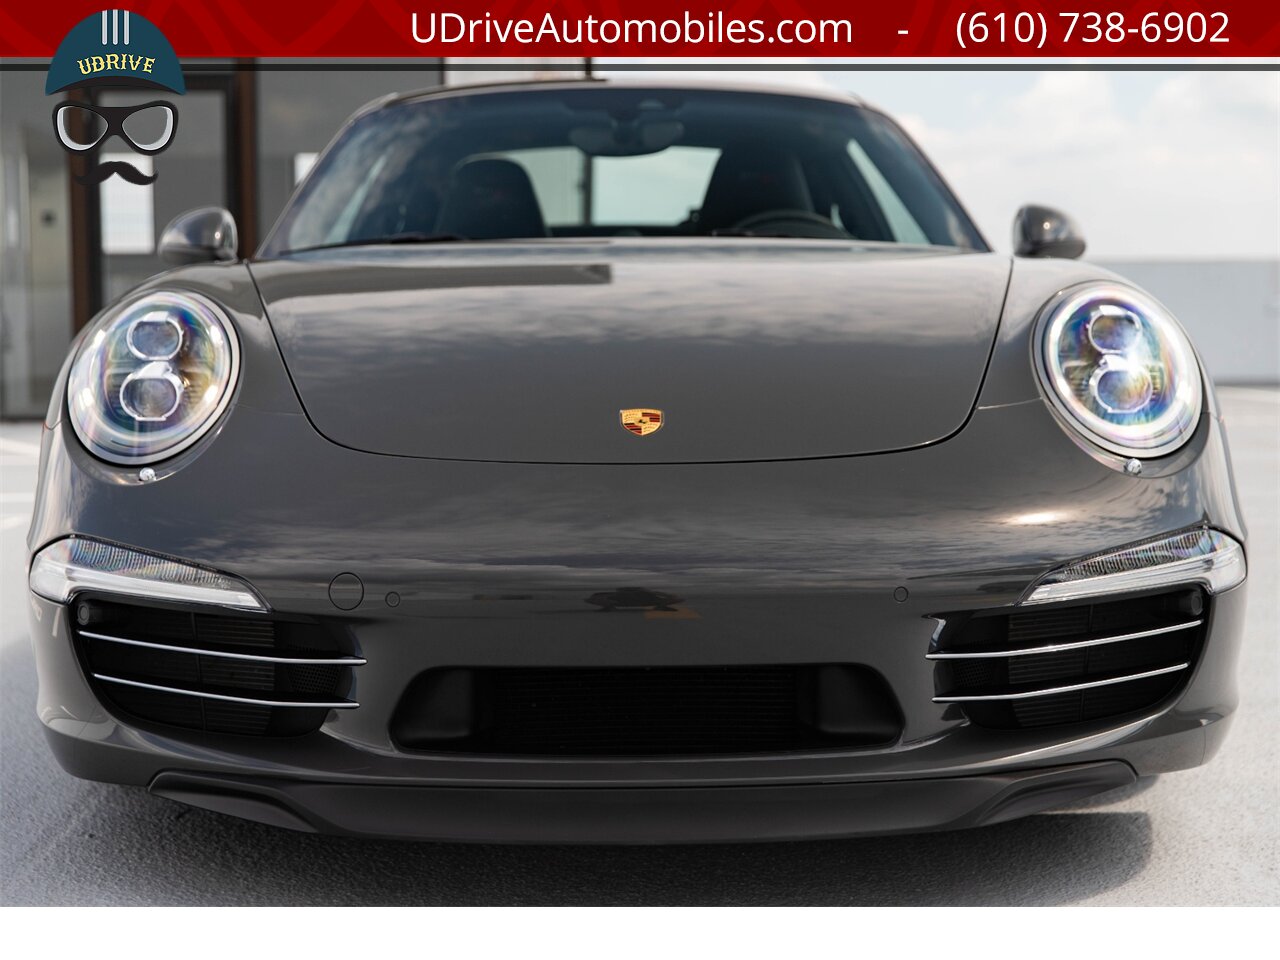 2014 Porsche 911 Carrera S 50th Anniversary Edition Certified  CPO Warranty thru 12/26/21 Full Front End Clear Film - Photo 11 - West Chester, PA 19382